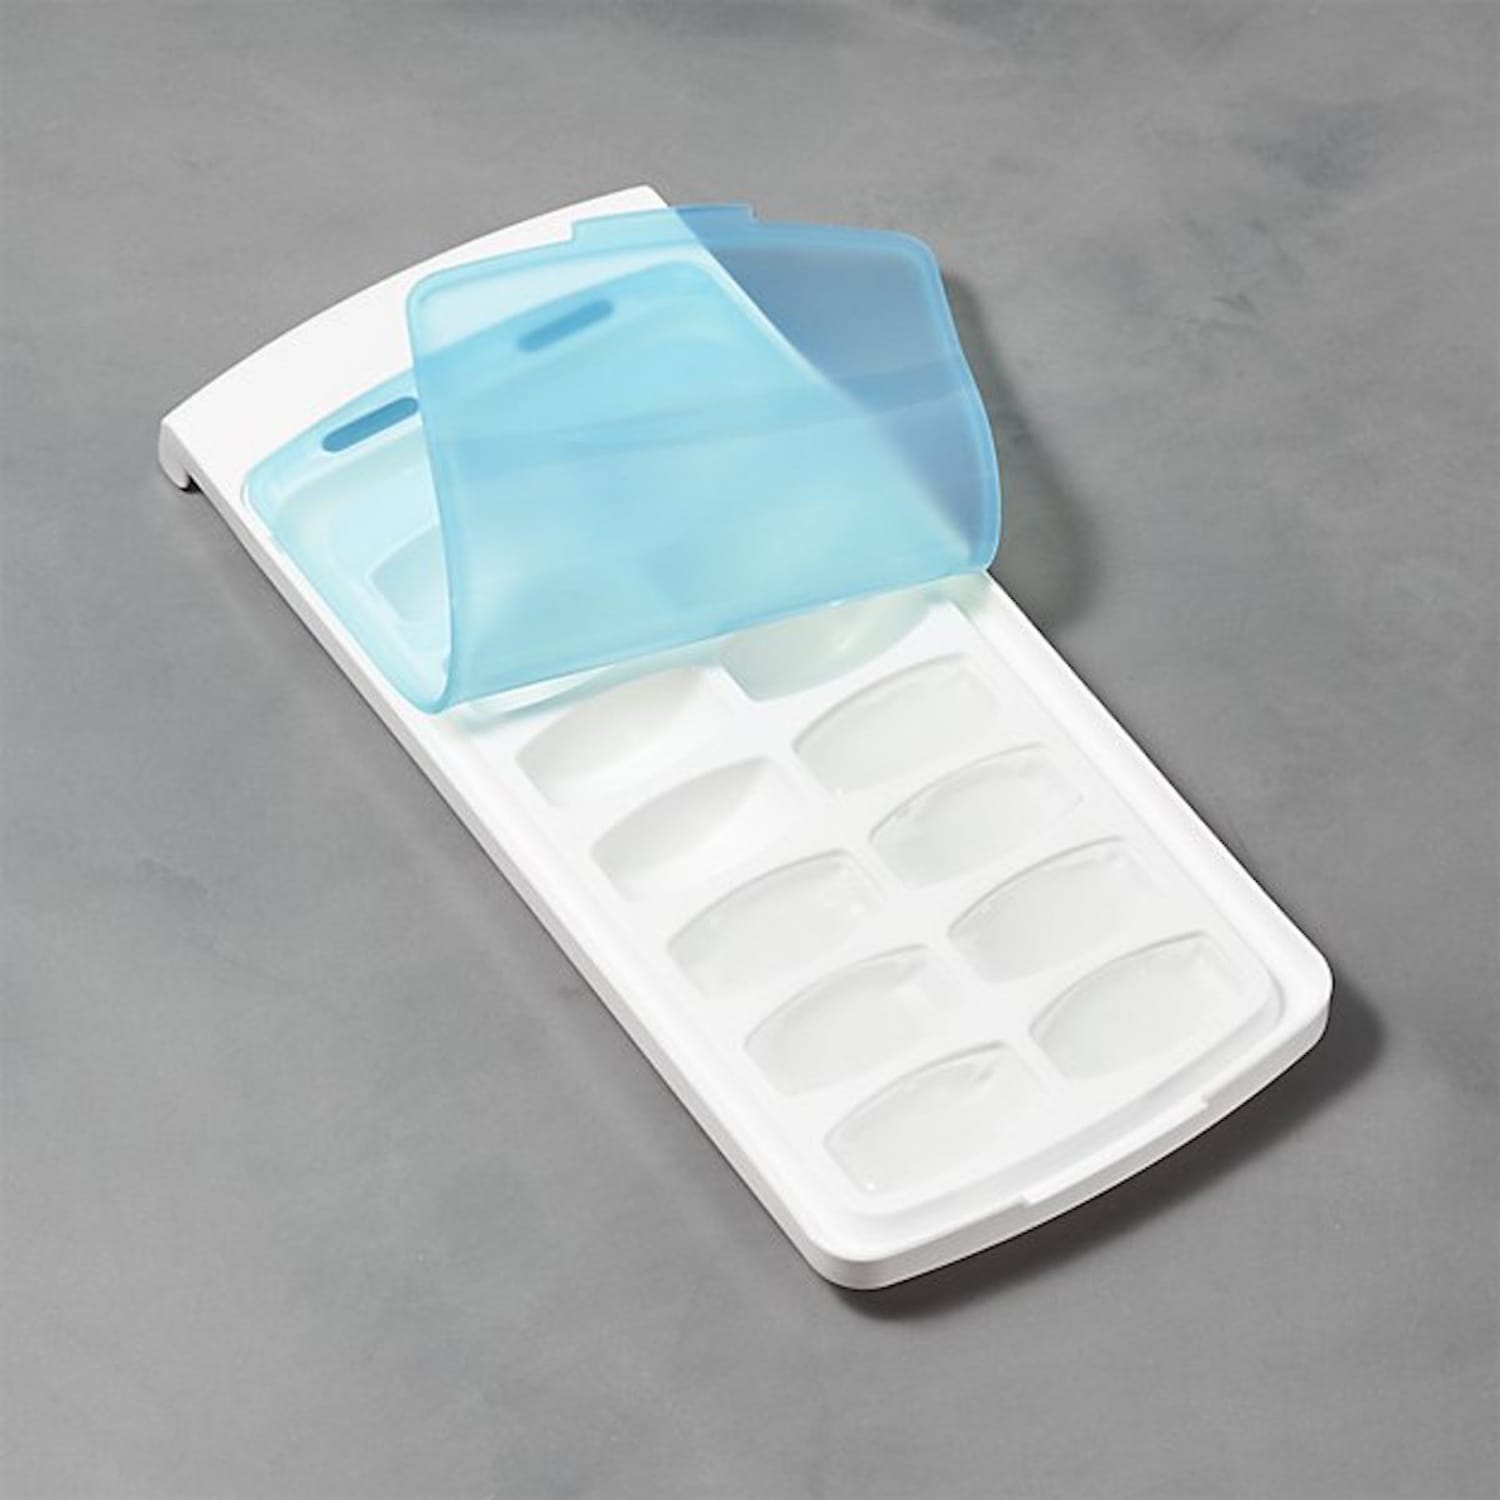 The Best Ice Cube Tray for Your Freezer